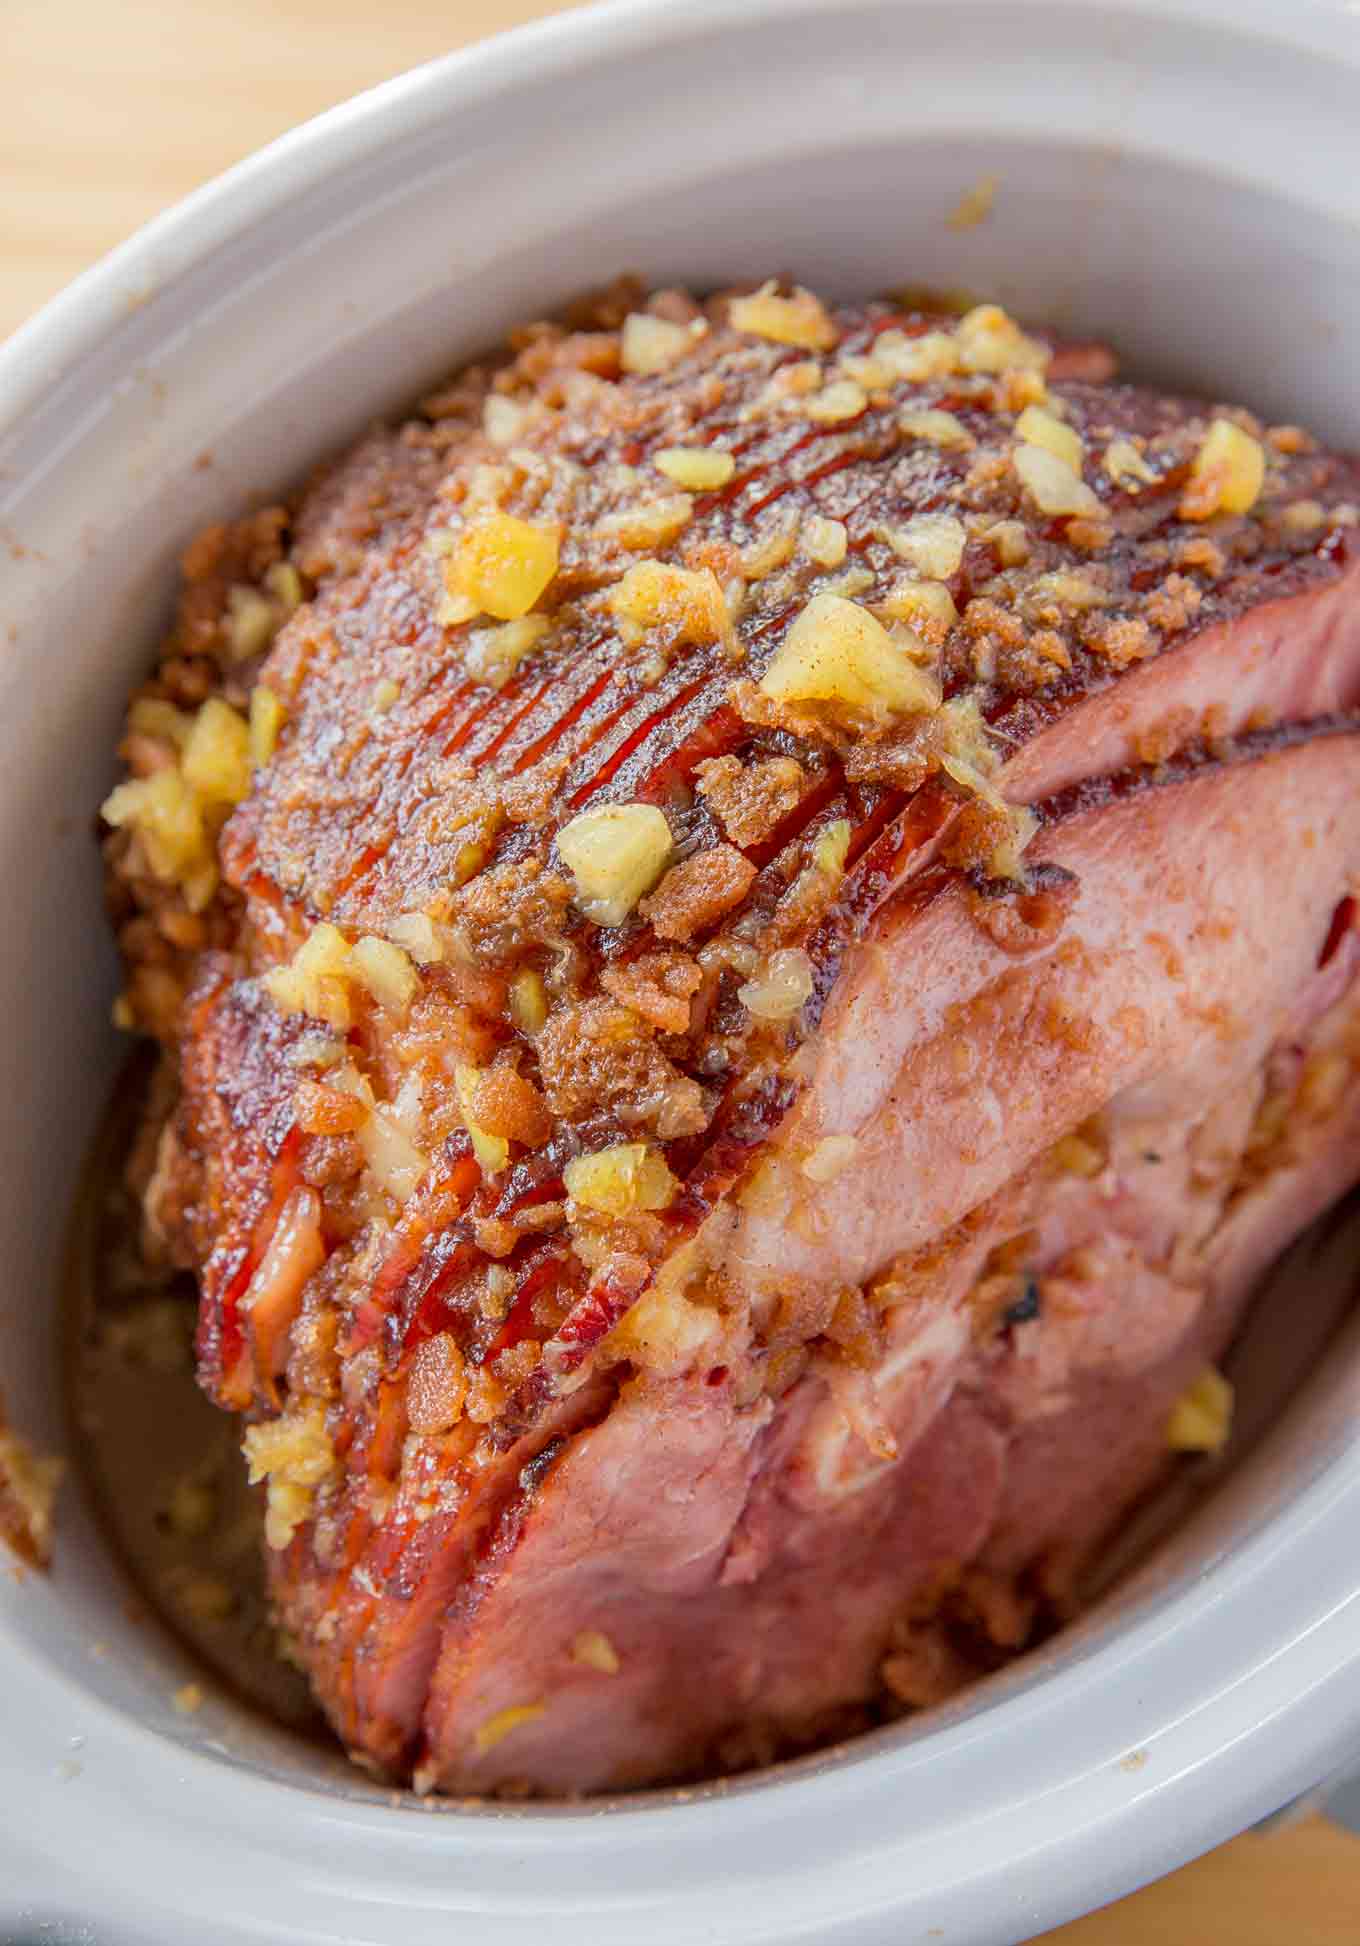 Overhead view of slow cooker ham with pineapple glaze